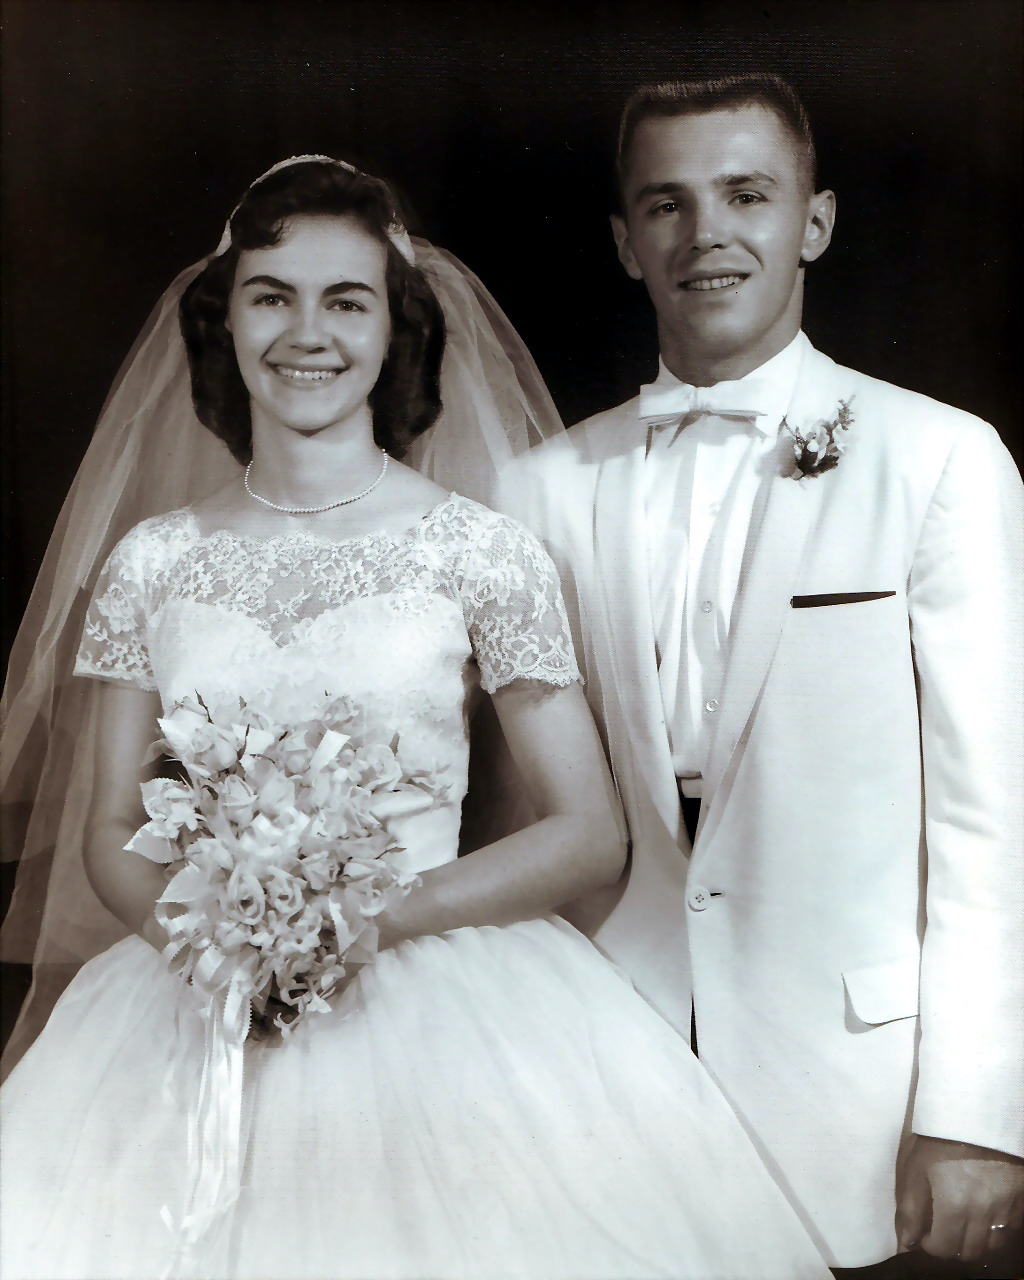 Gus and Mary on their wedding day